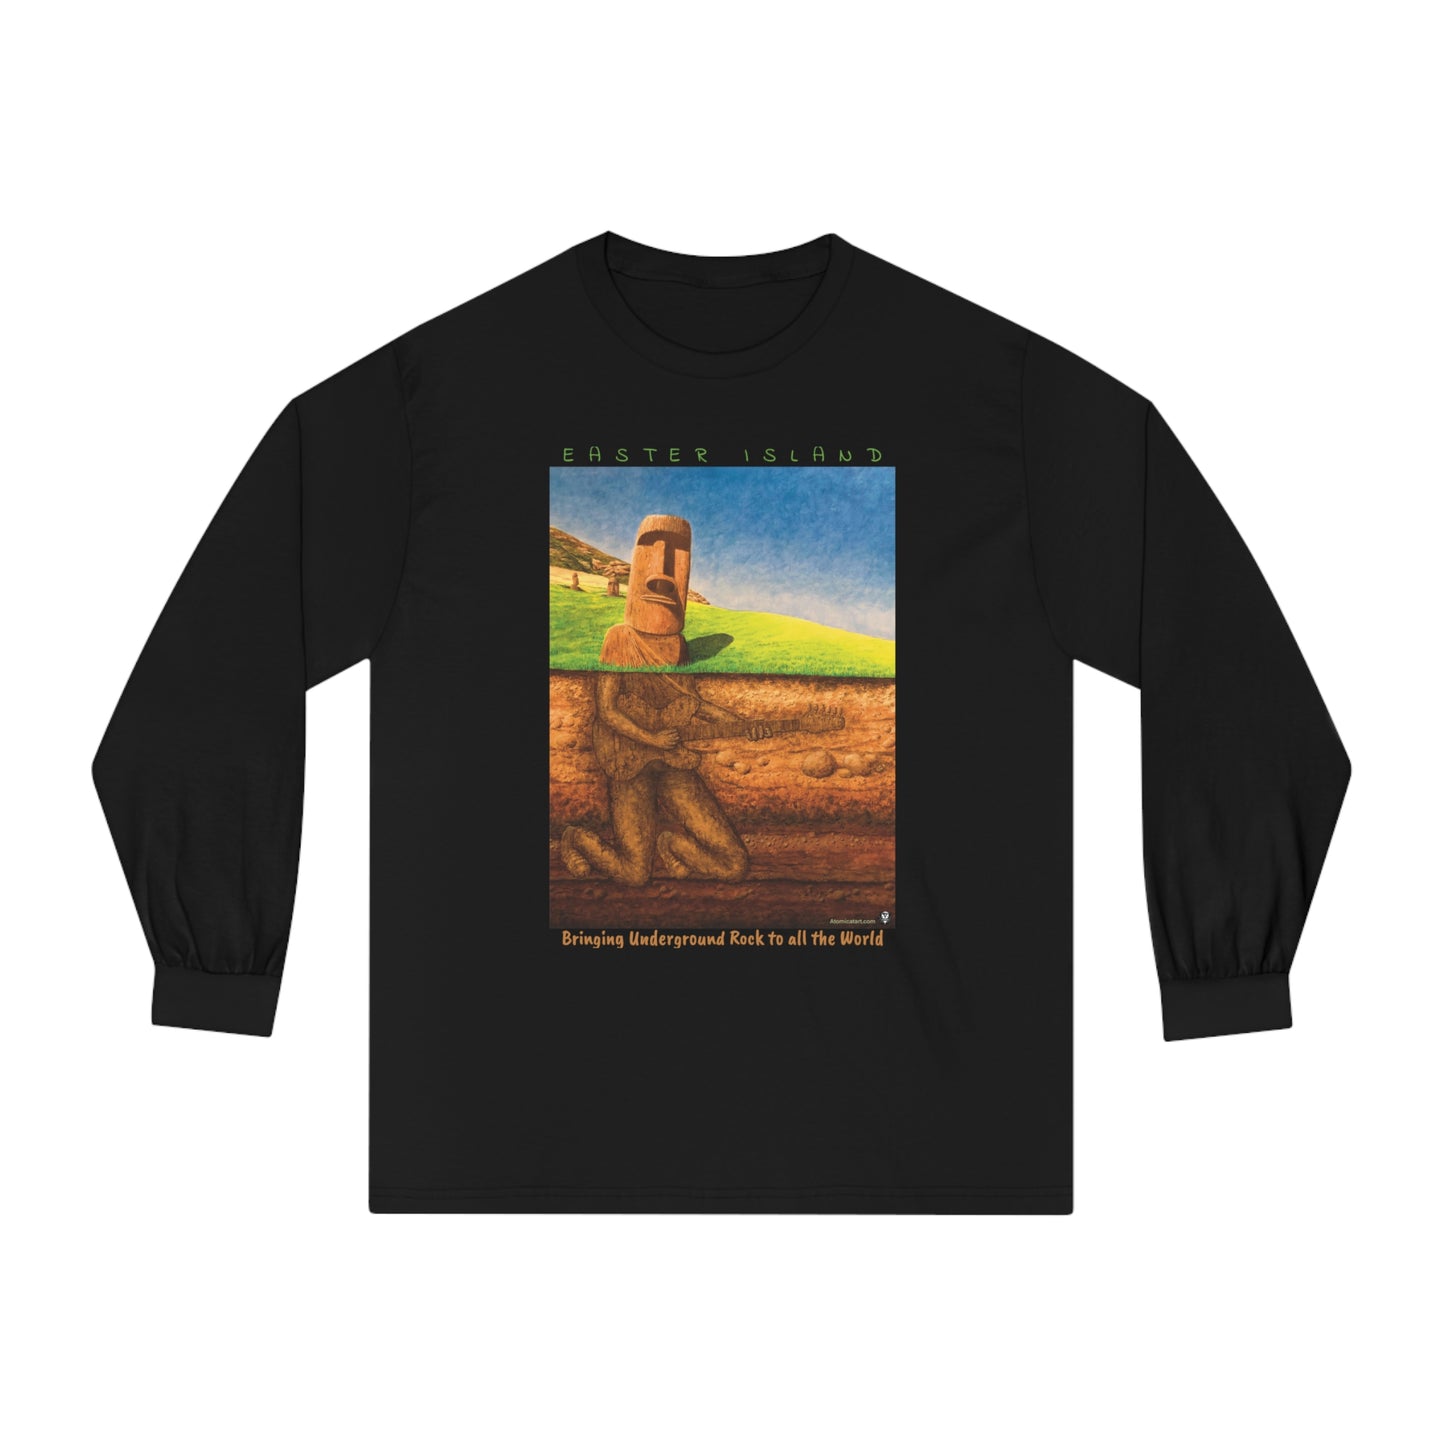 Underground Rock with text - Long Sleeve